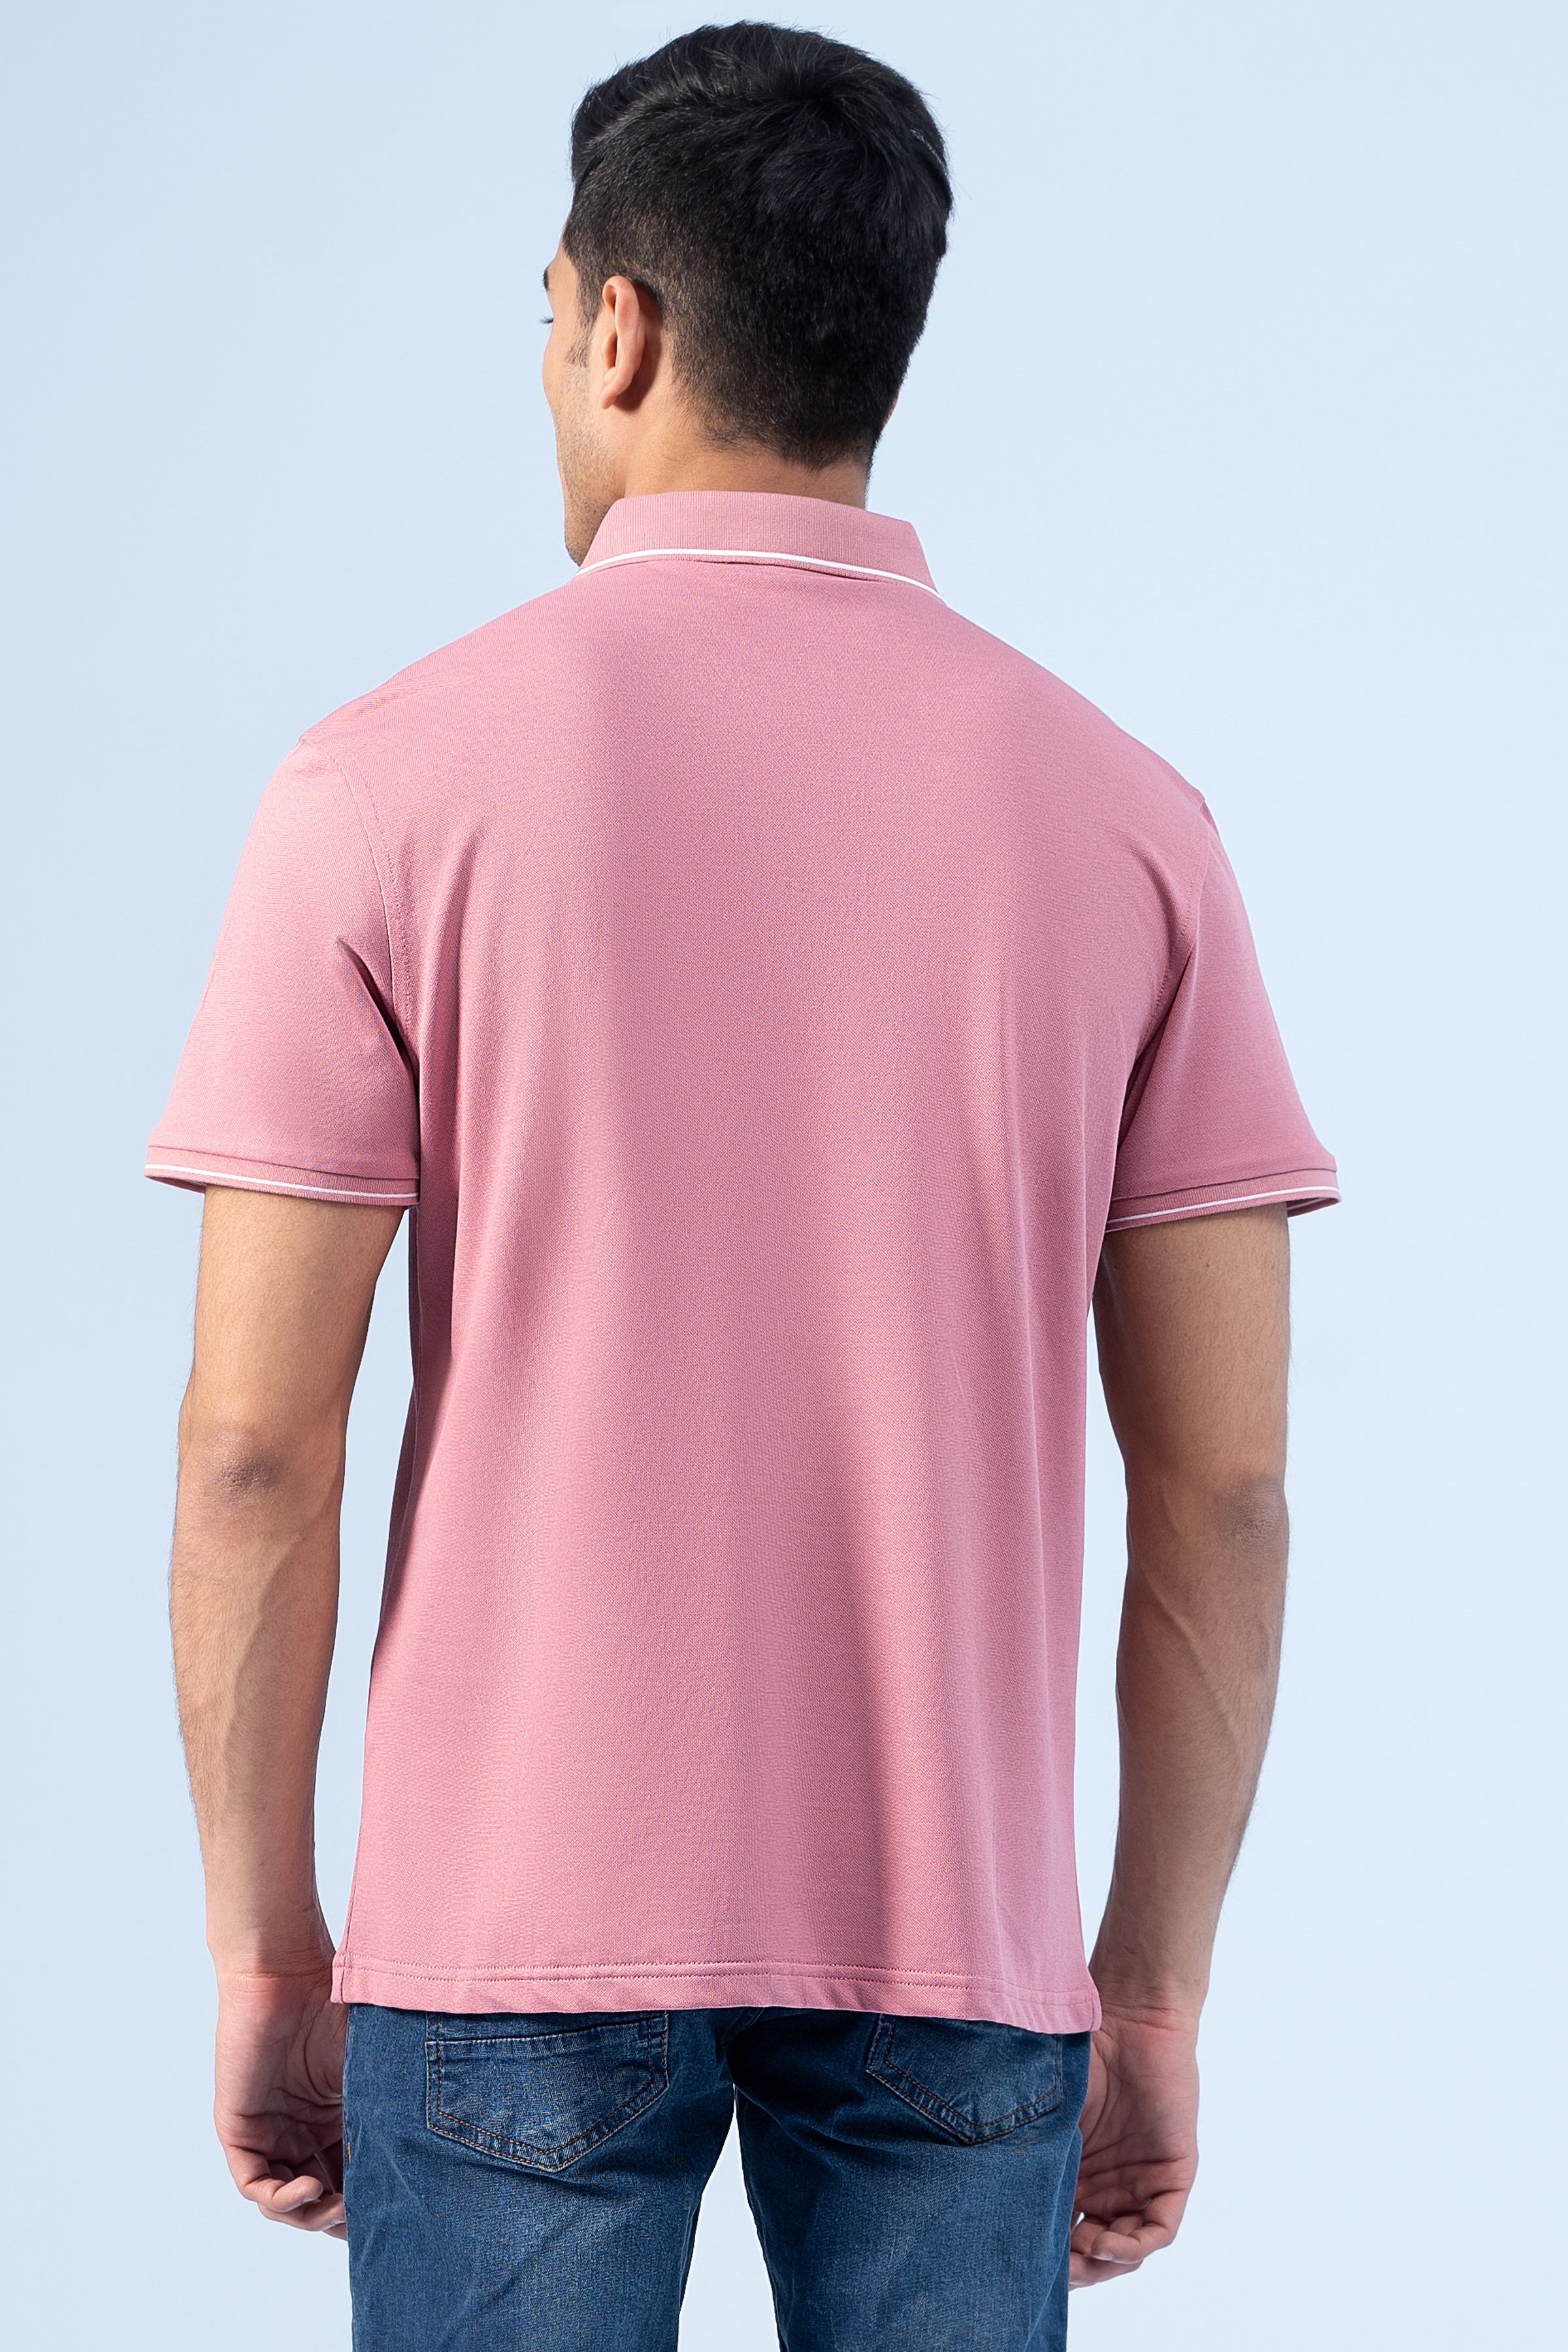 EXECUTIVE ICONIC POLO CORAL PINK - Charcoal Clothing